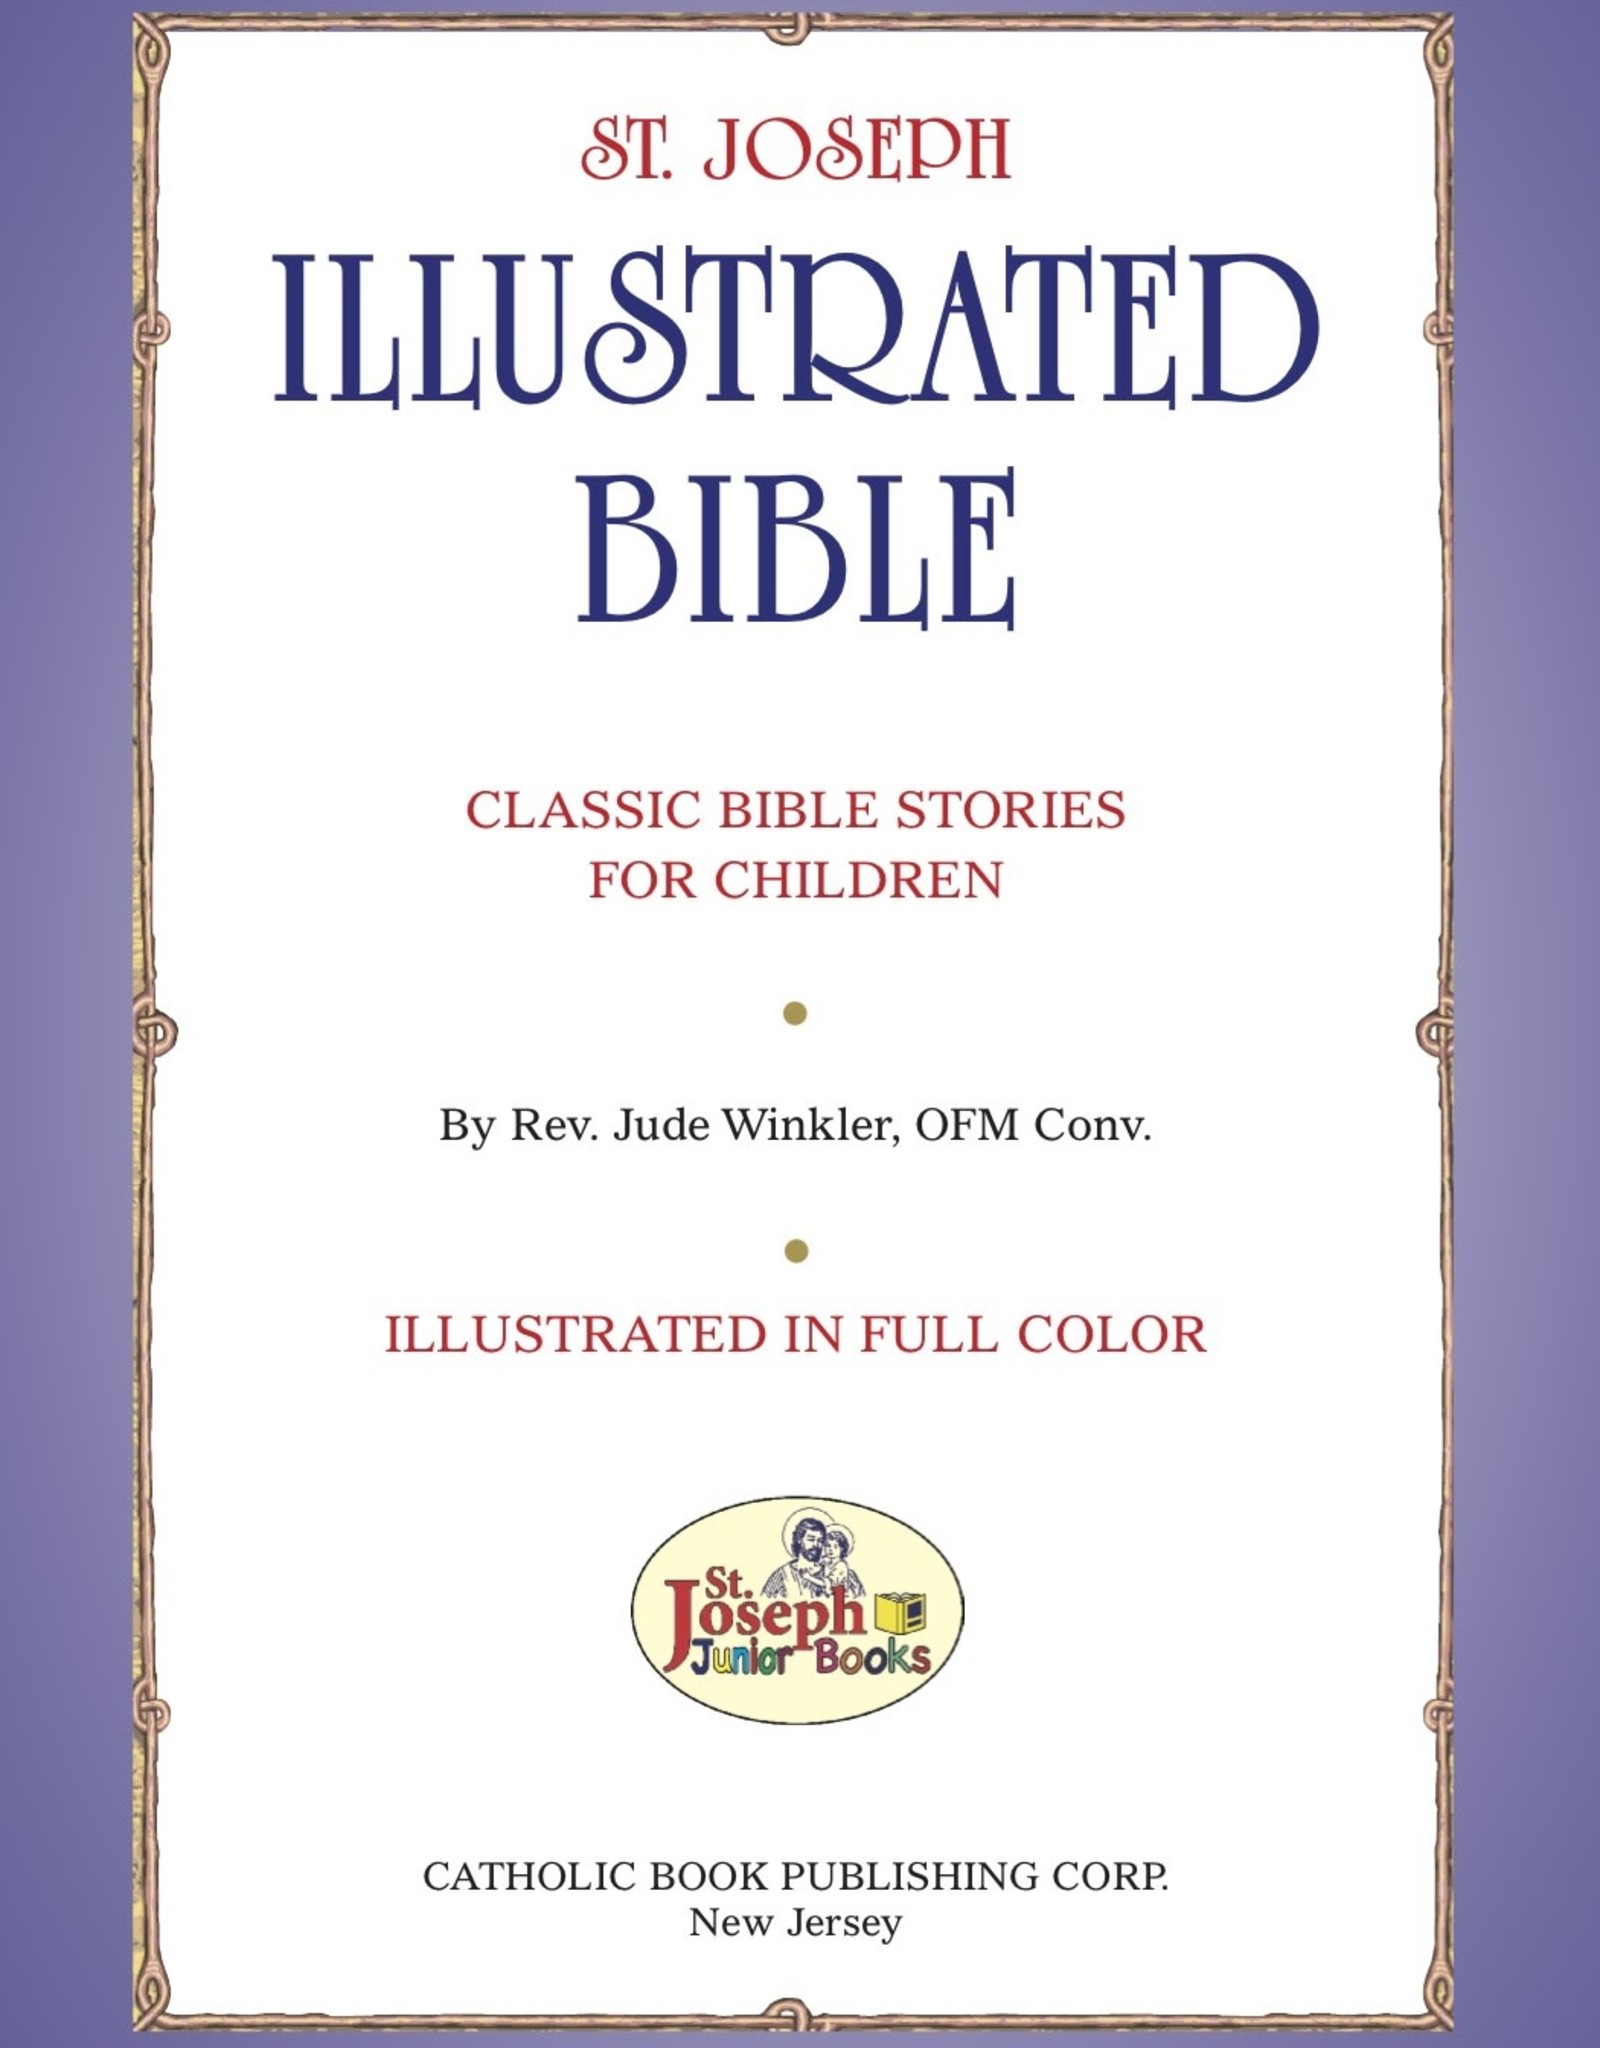 Catholic Book Publishing St. Joseph Illustrated Bible:  Classic Bible Stories for Children, by Jude Winkler (padded)